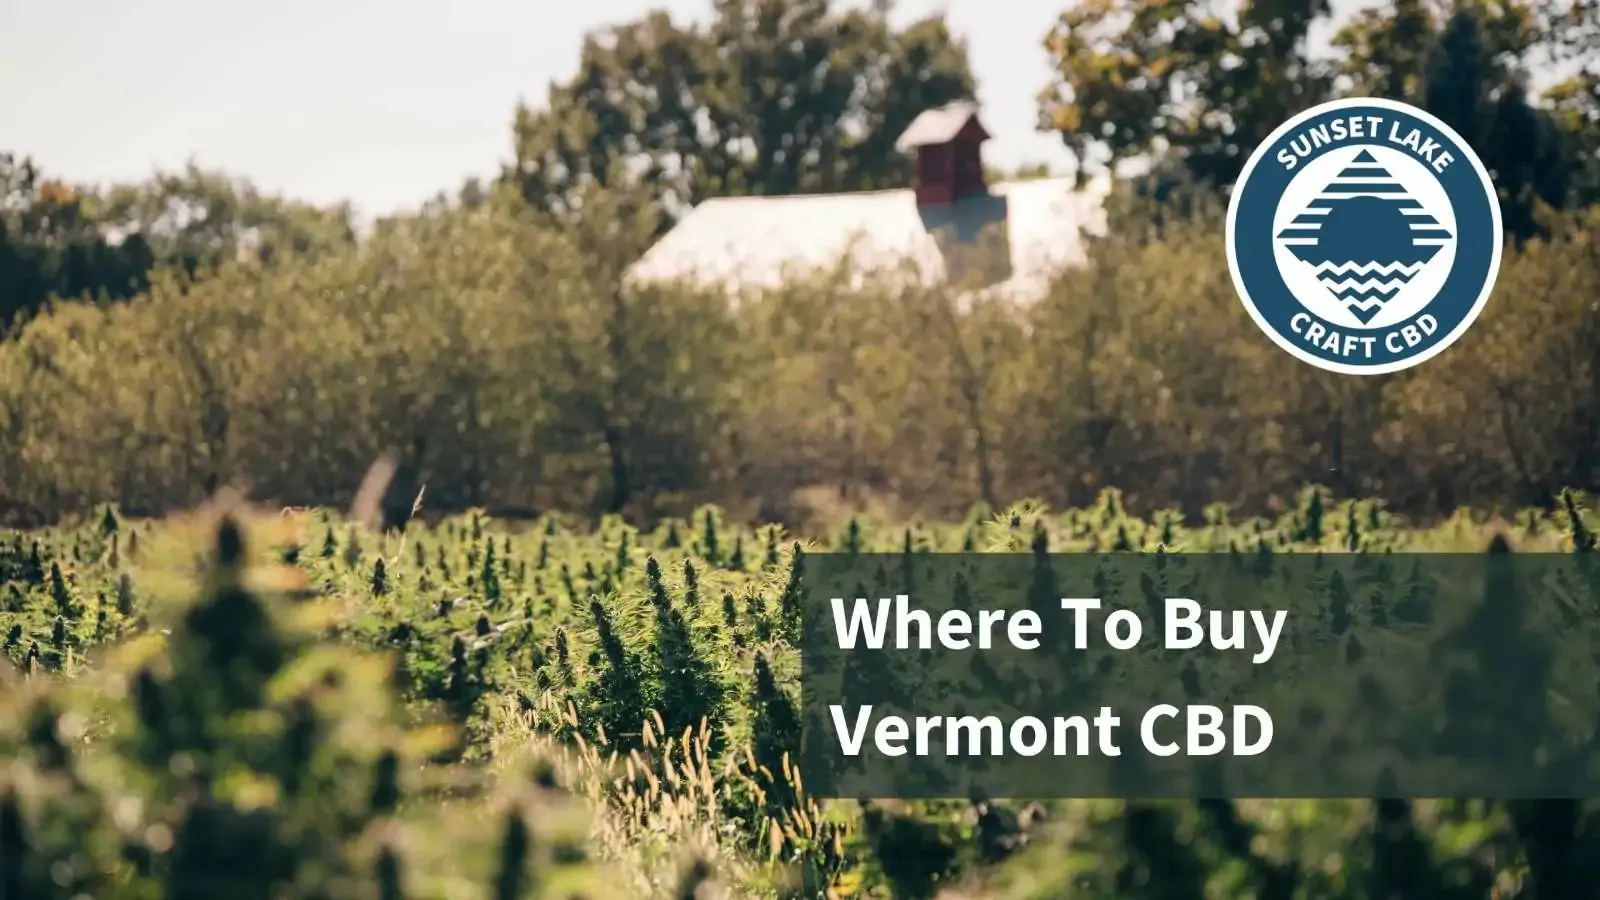 A Vermont CBD farm with the text "Where to buy Vermont CBD"